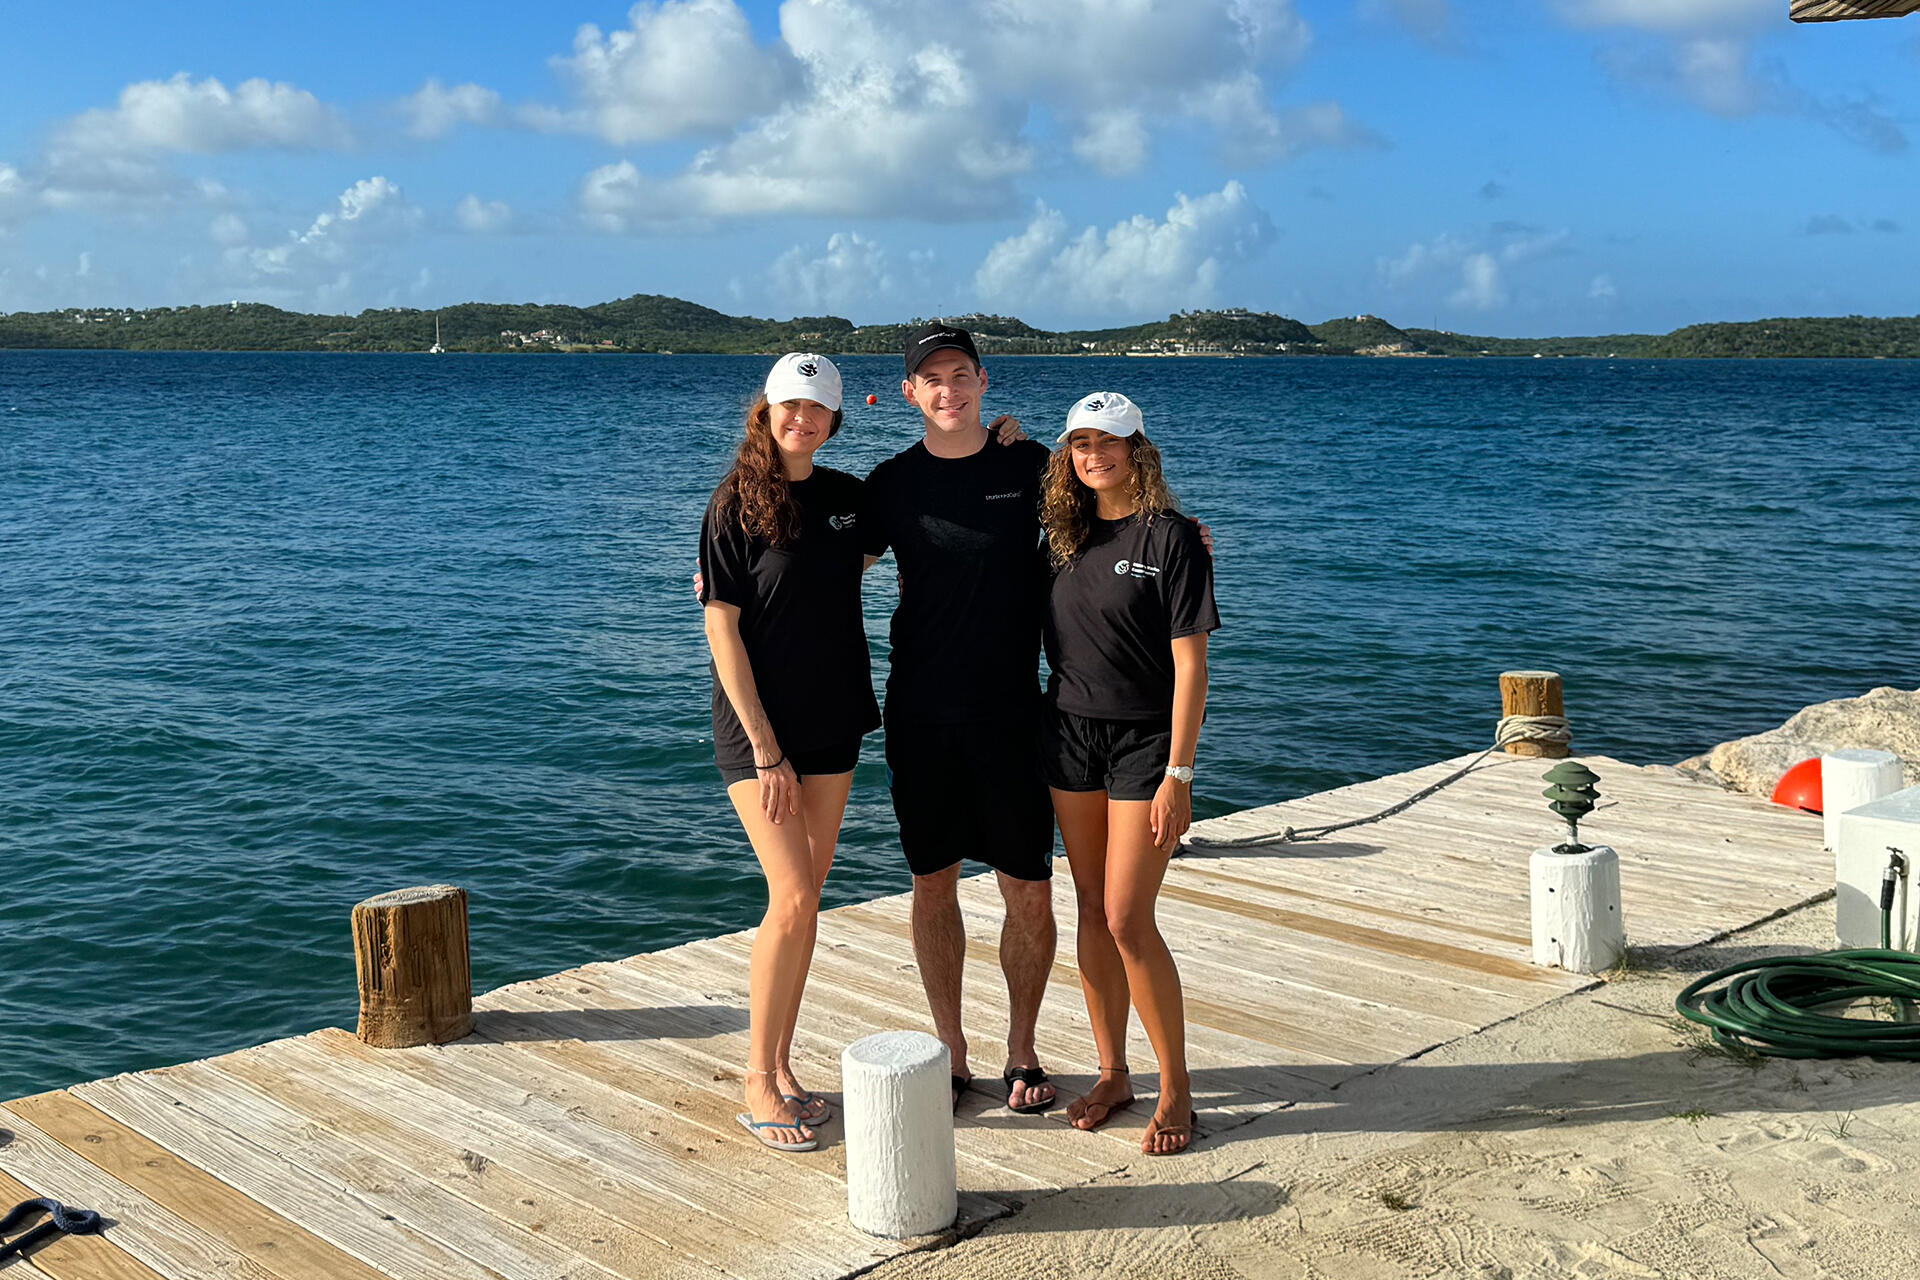 Shannon Costelloe, EMC Diver and Communications Officer, Jon Slator, Chief Product Officer at Starboard Card, and Monique Bigler, EMC Diver and Research Assistant before their dive.